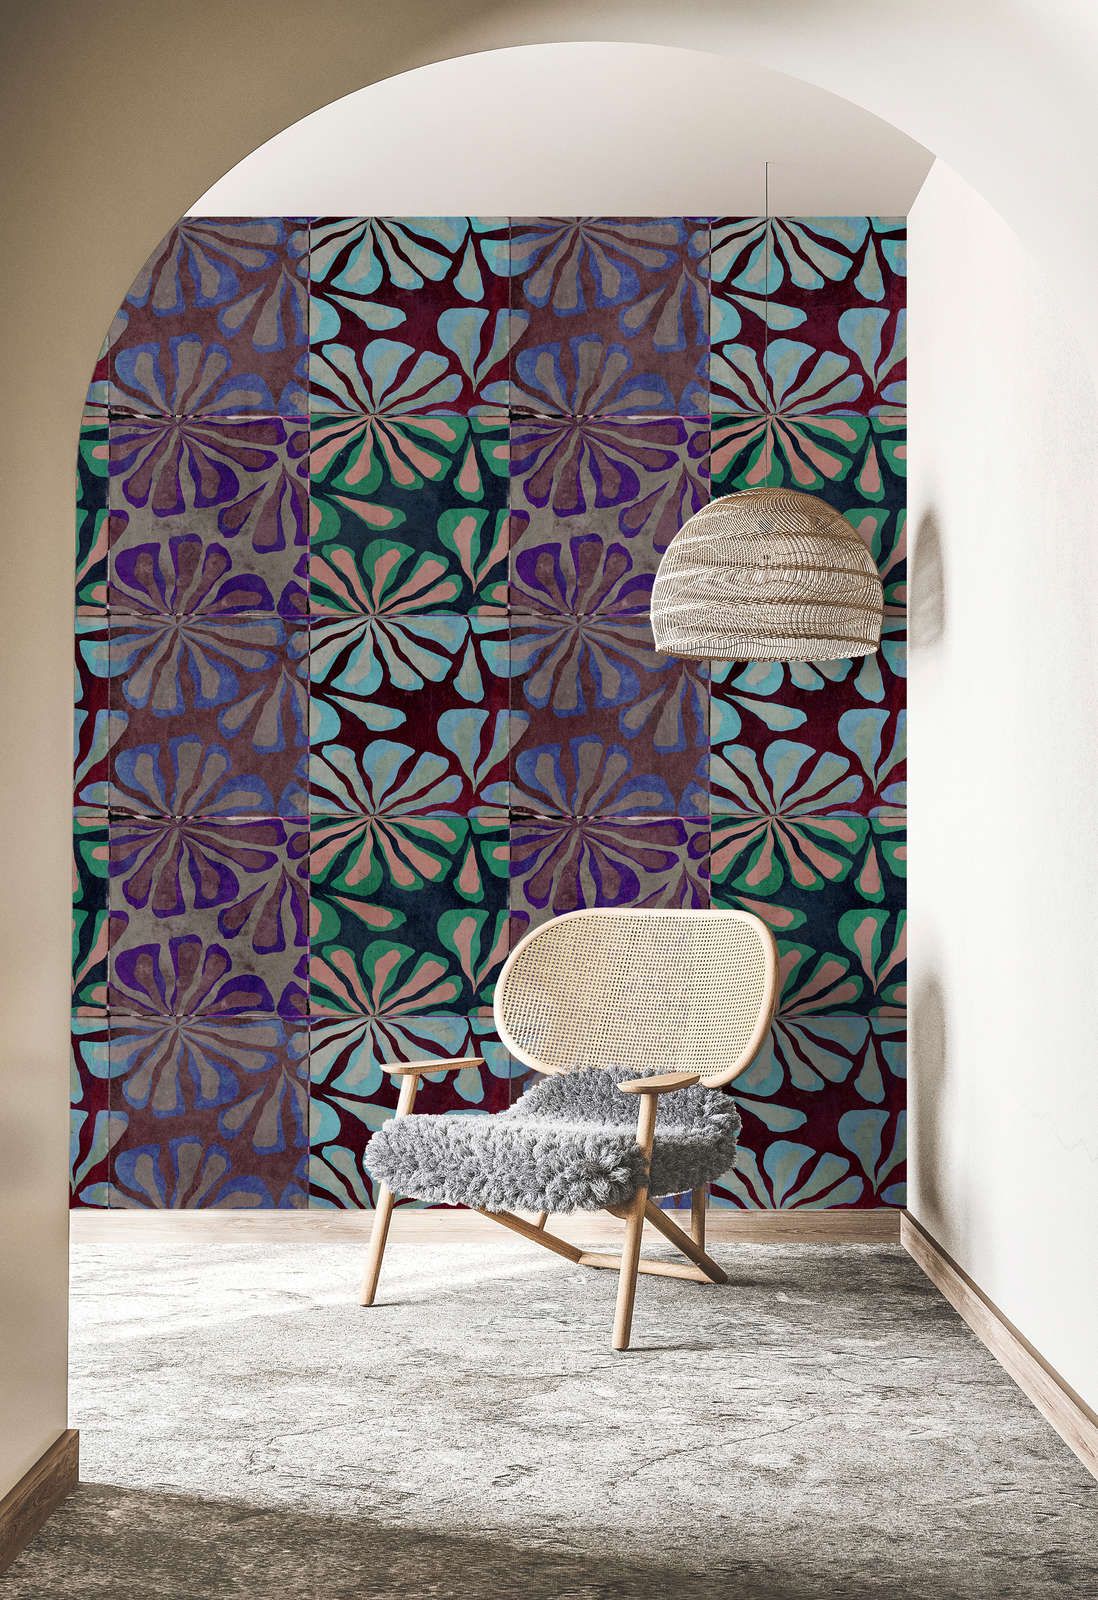             Photo wallpaper »nevio« - Colourful patchwork design in front of concrete plaster look - Lightly textured non-woven fabric
        